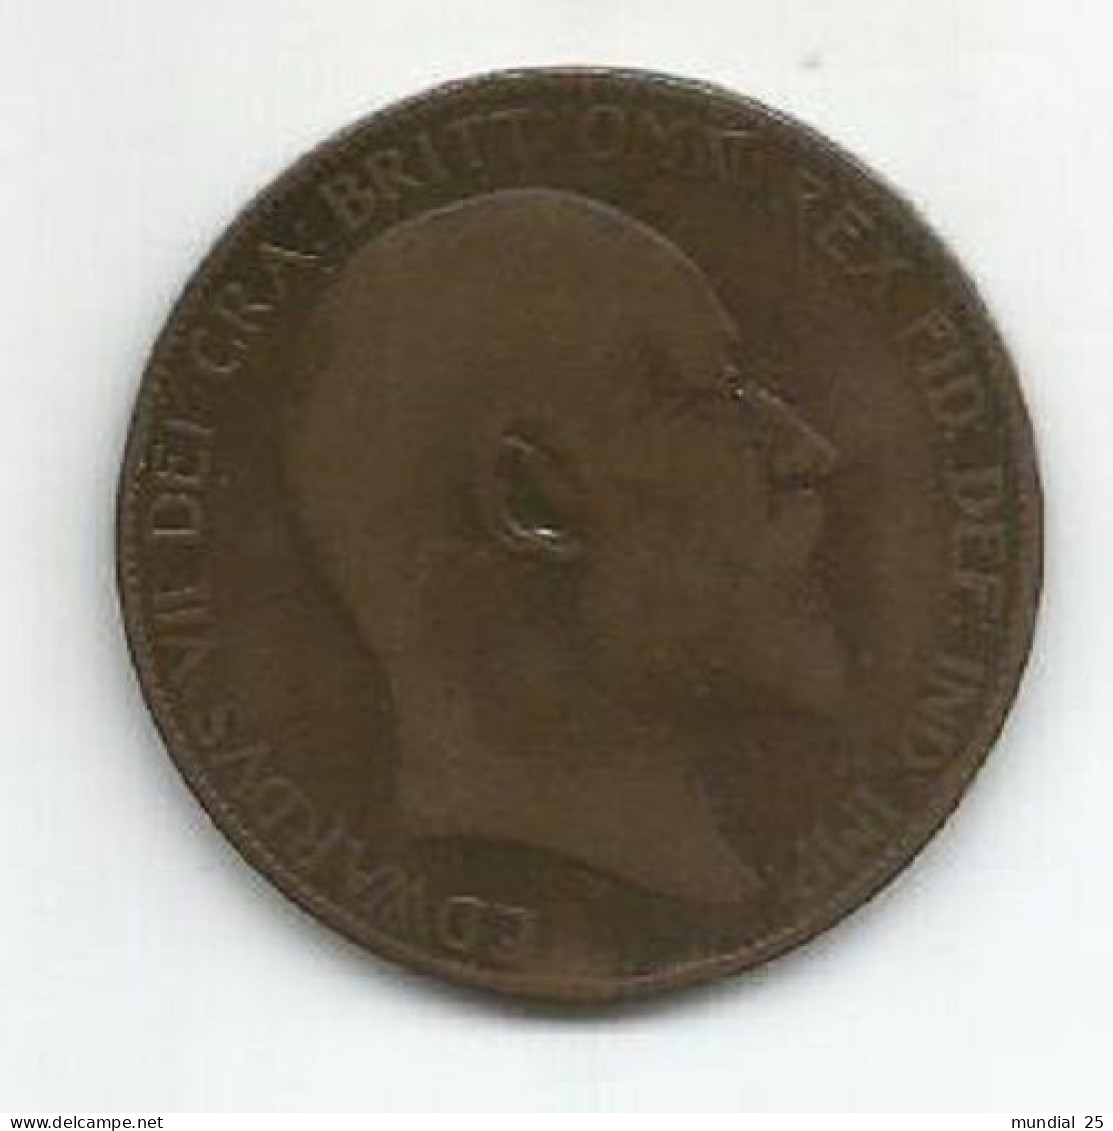 GREAT BRITAIN 1 PENNY 1907 - D. 1 Penny